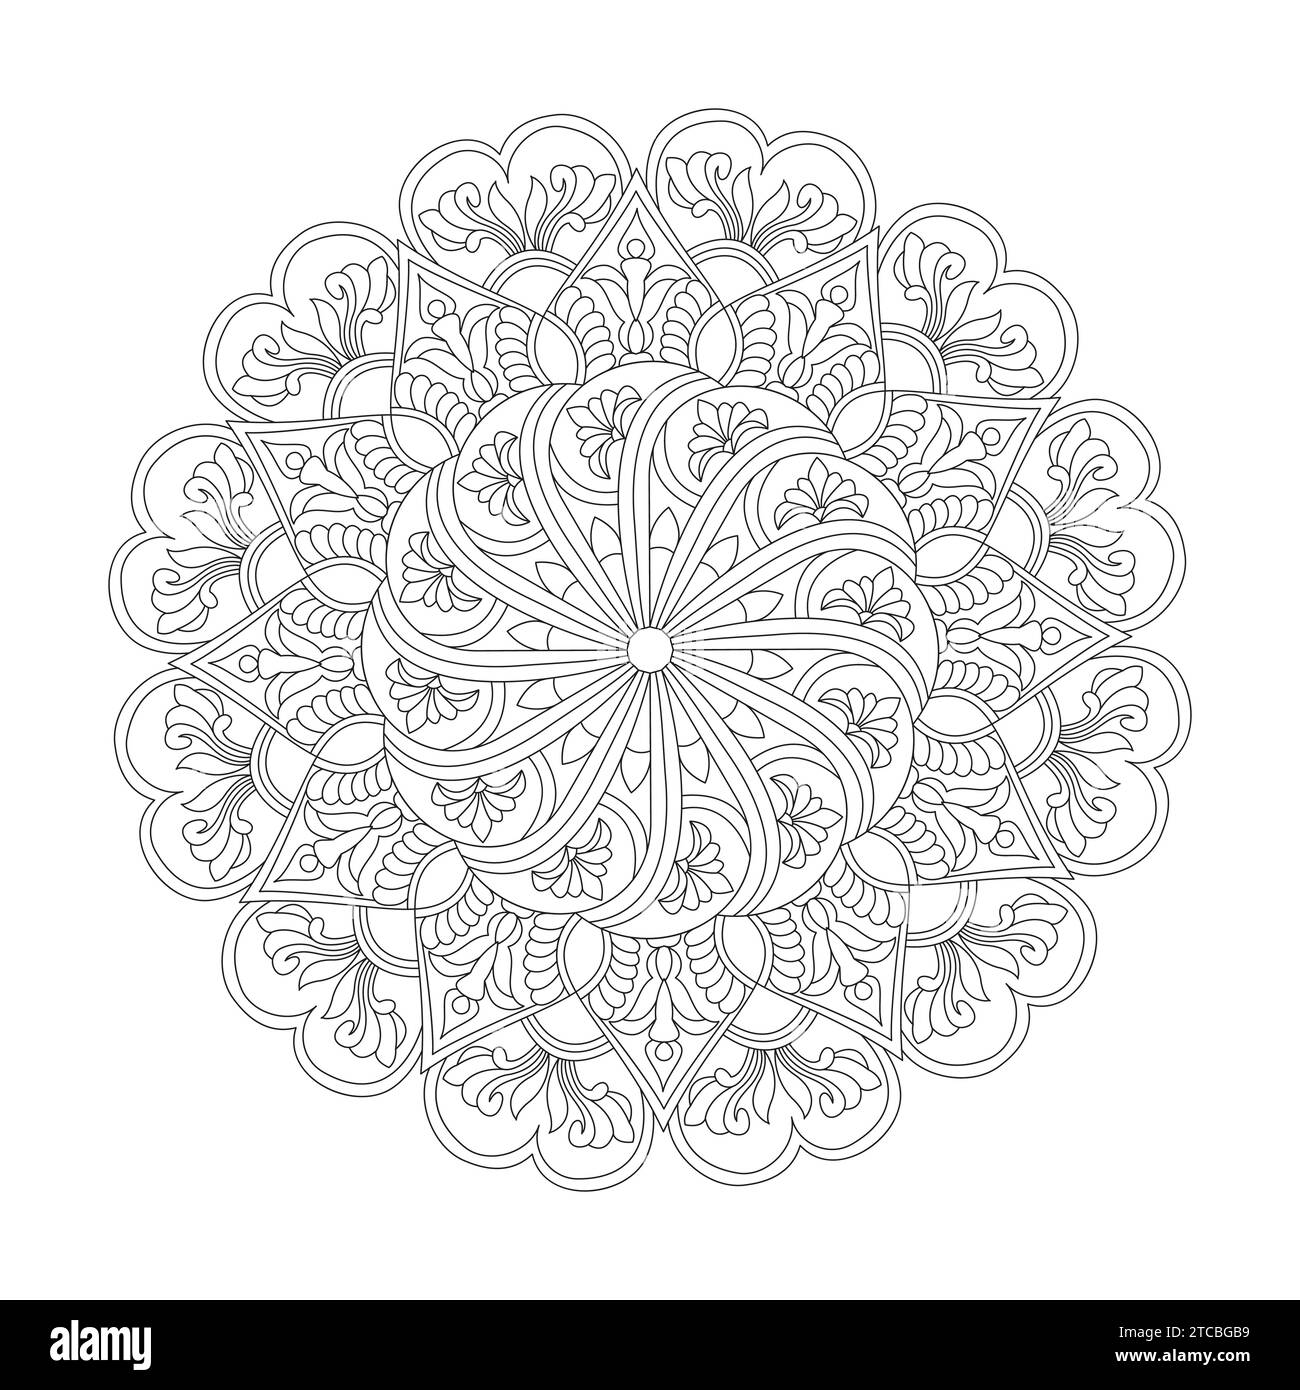 Zen circles adult mandala coloring book page for kdp book interior. Peaceful Petals, Ability to Relax, Brain Experiences, Harmonious Haven, Peaceful P Stock Vector